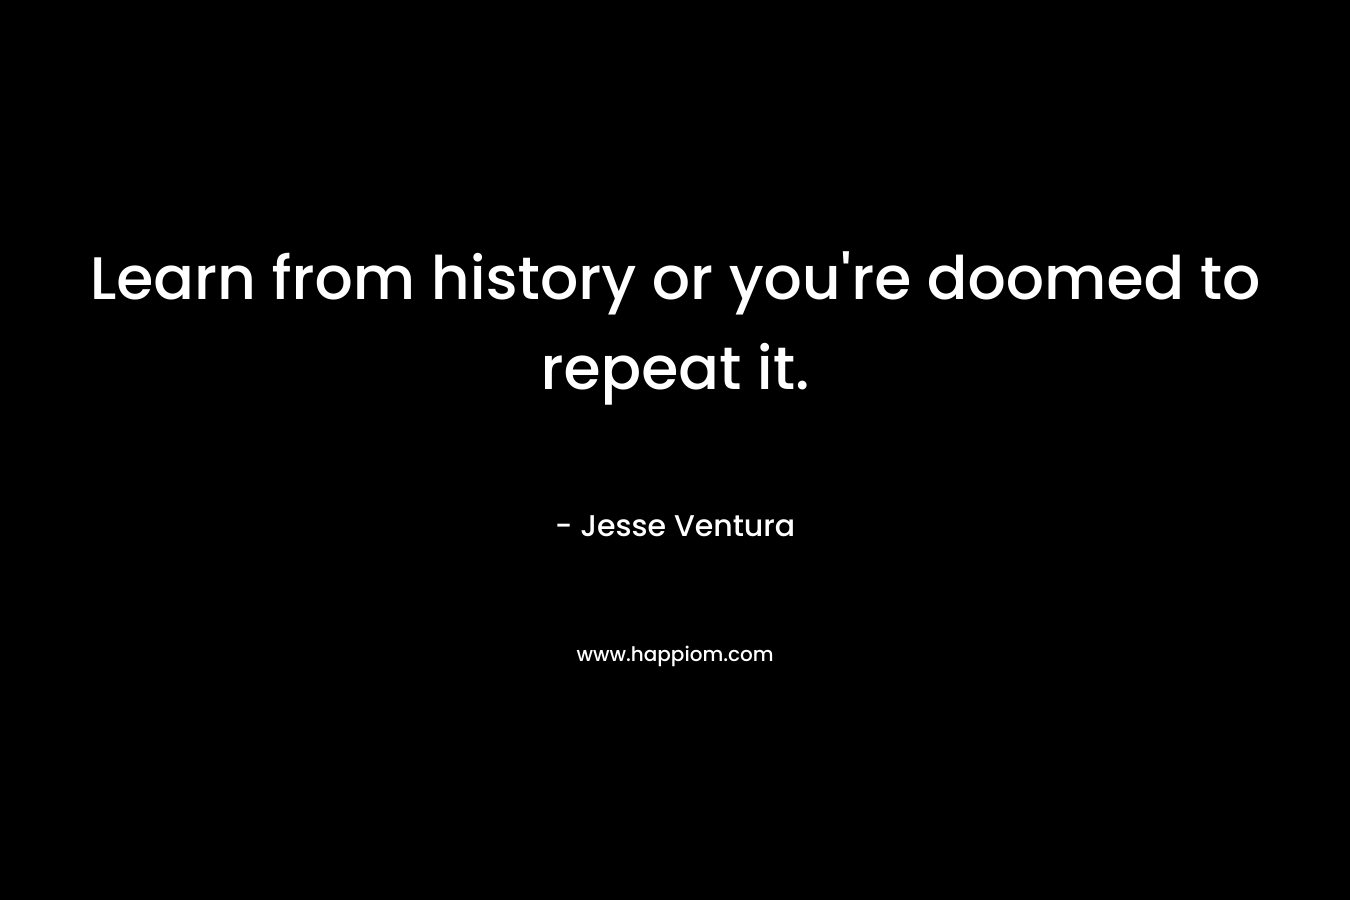 Learn from history or you’re doomed to repeat it. – Jesse Ventura